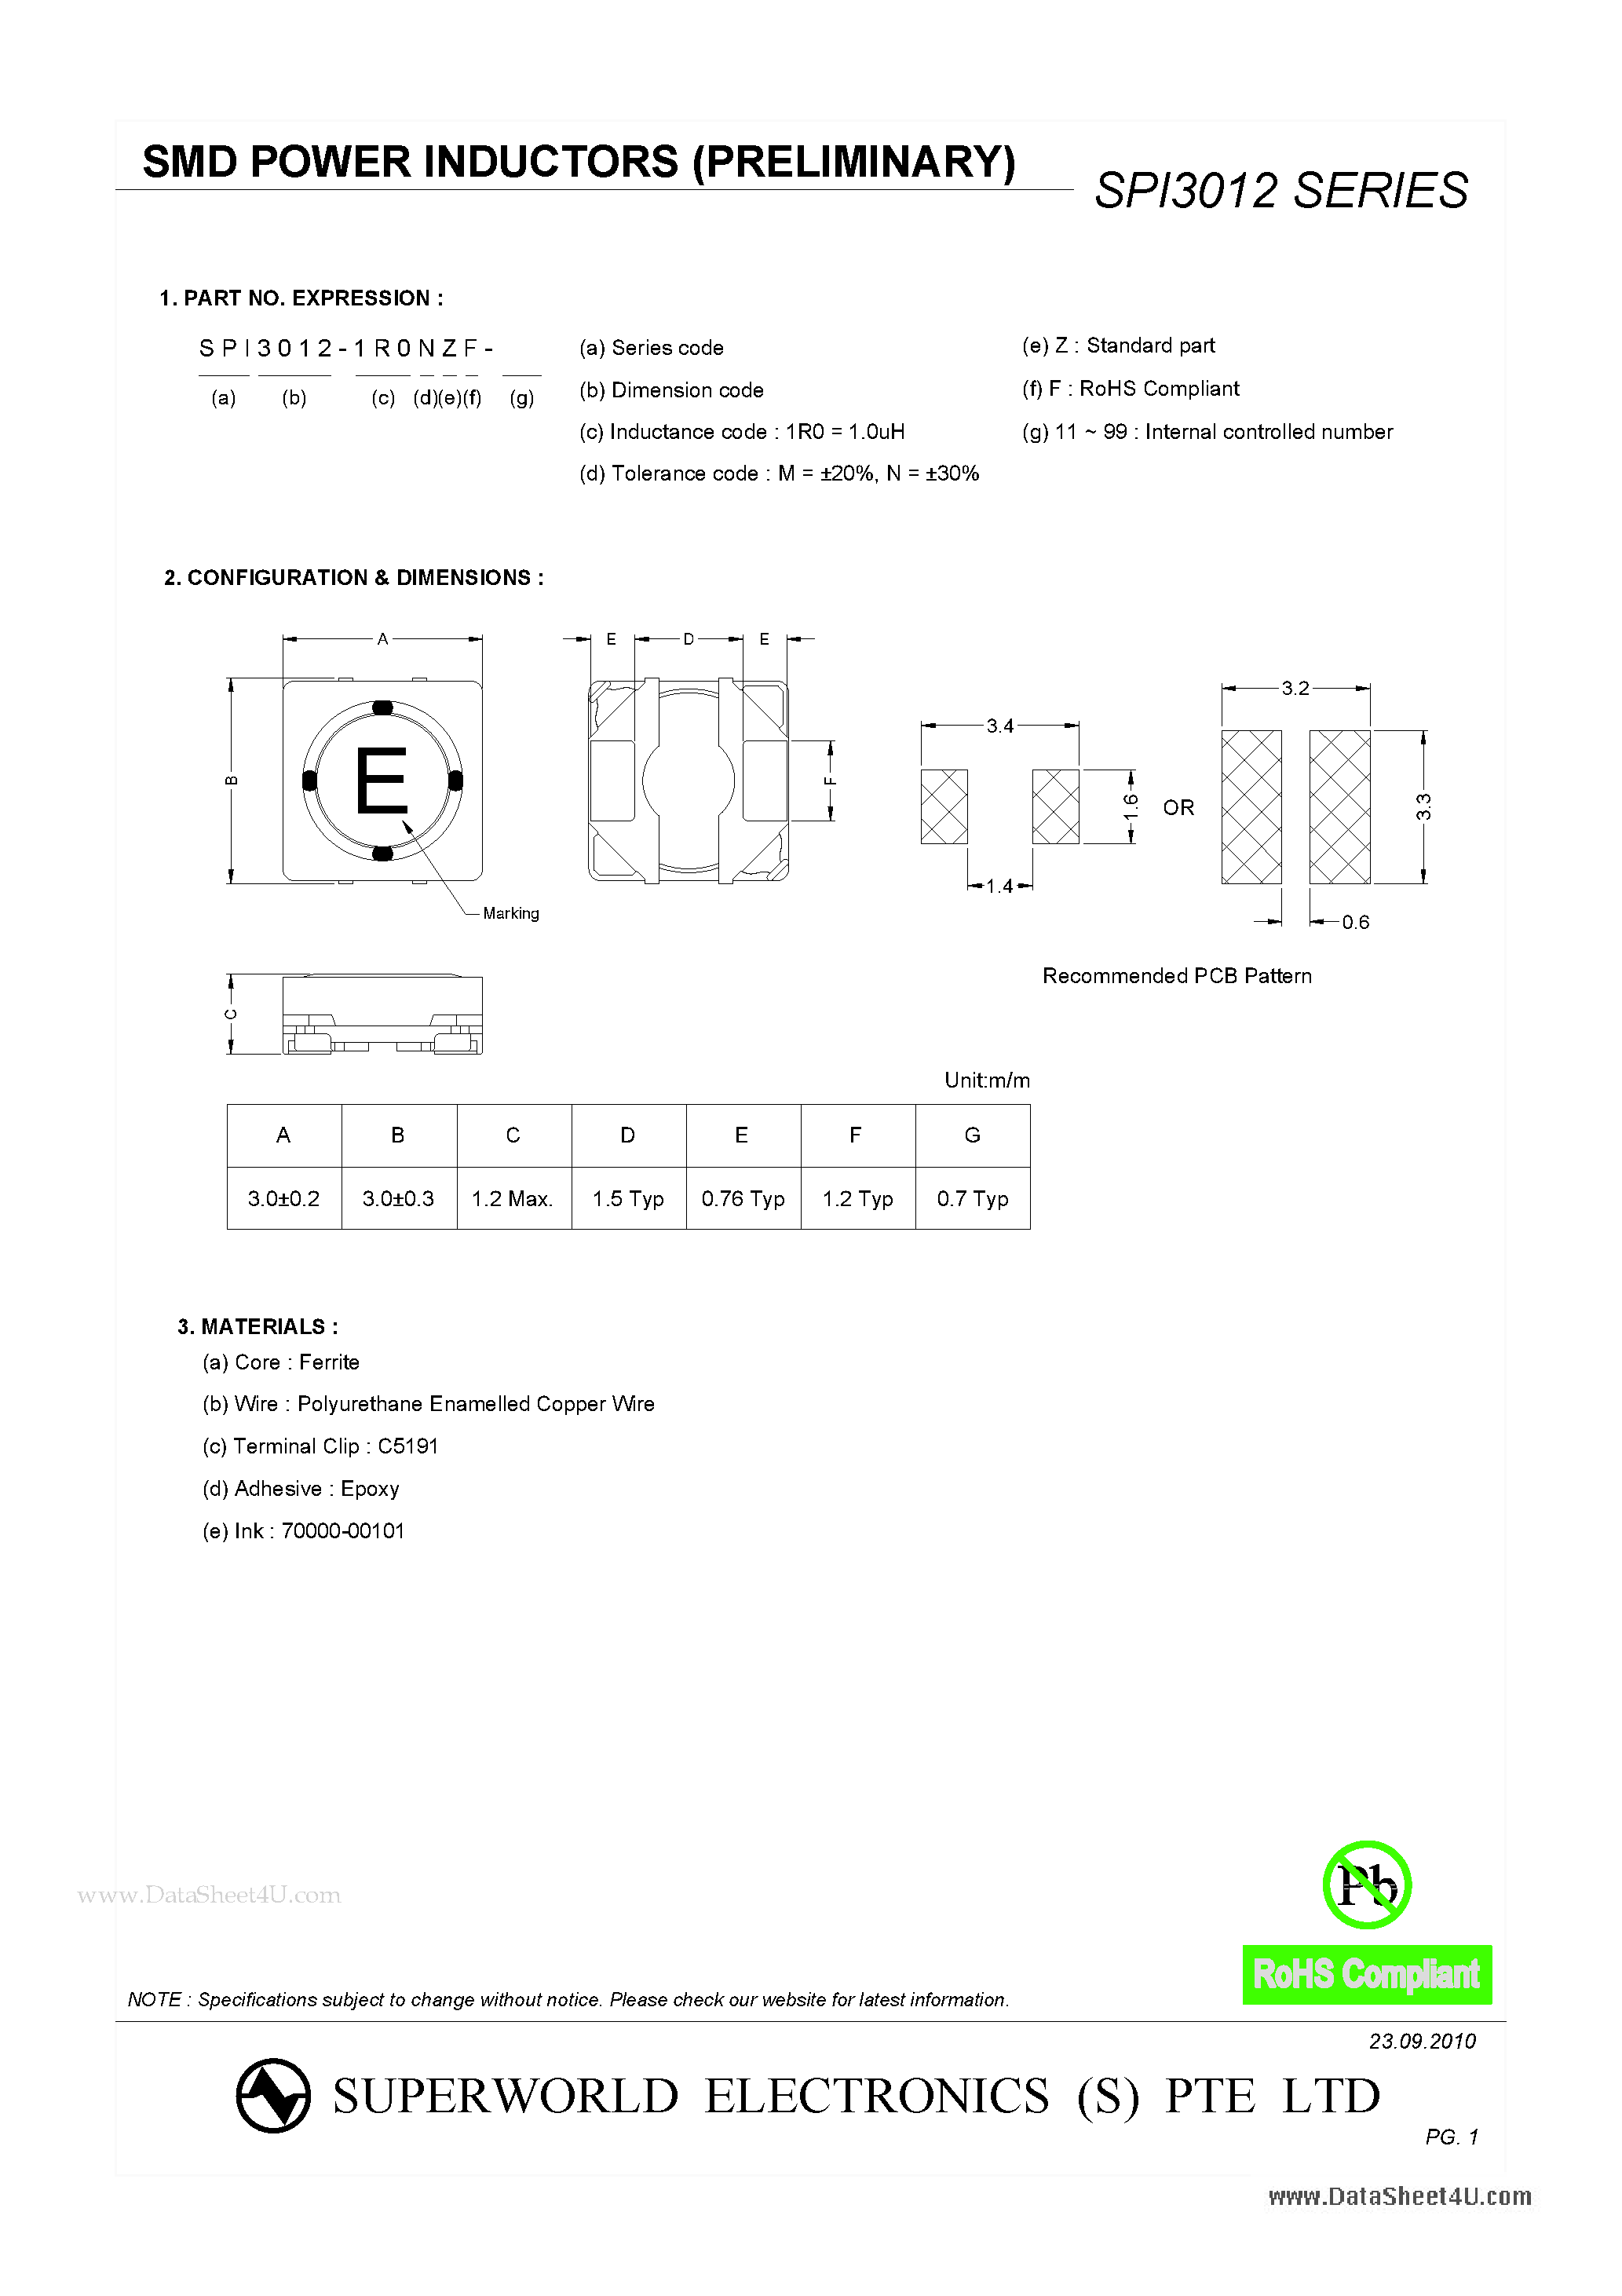 Datasheet SPI3012 - SMD POWER INDUCTORS page 1